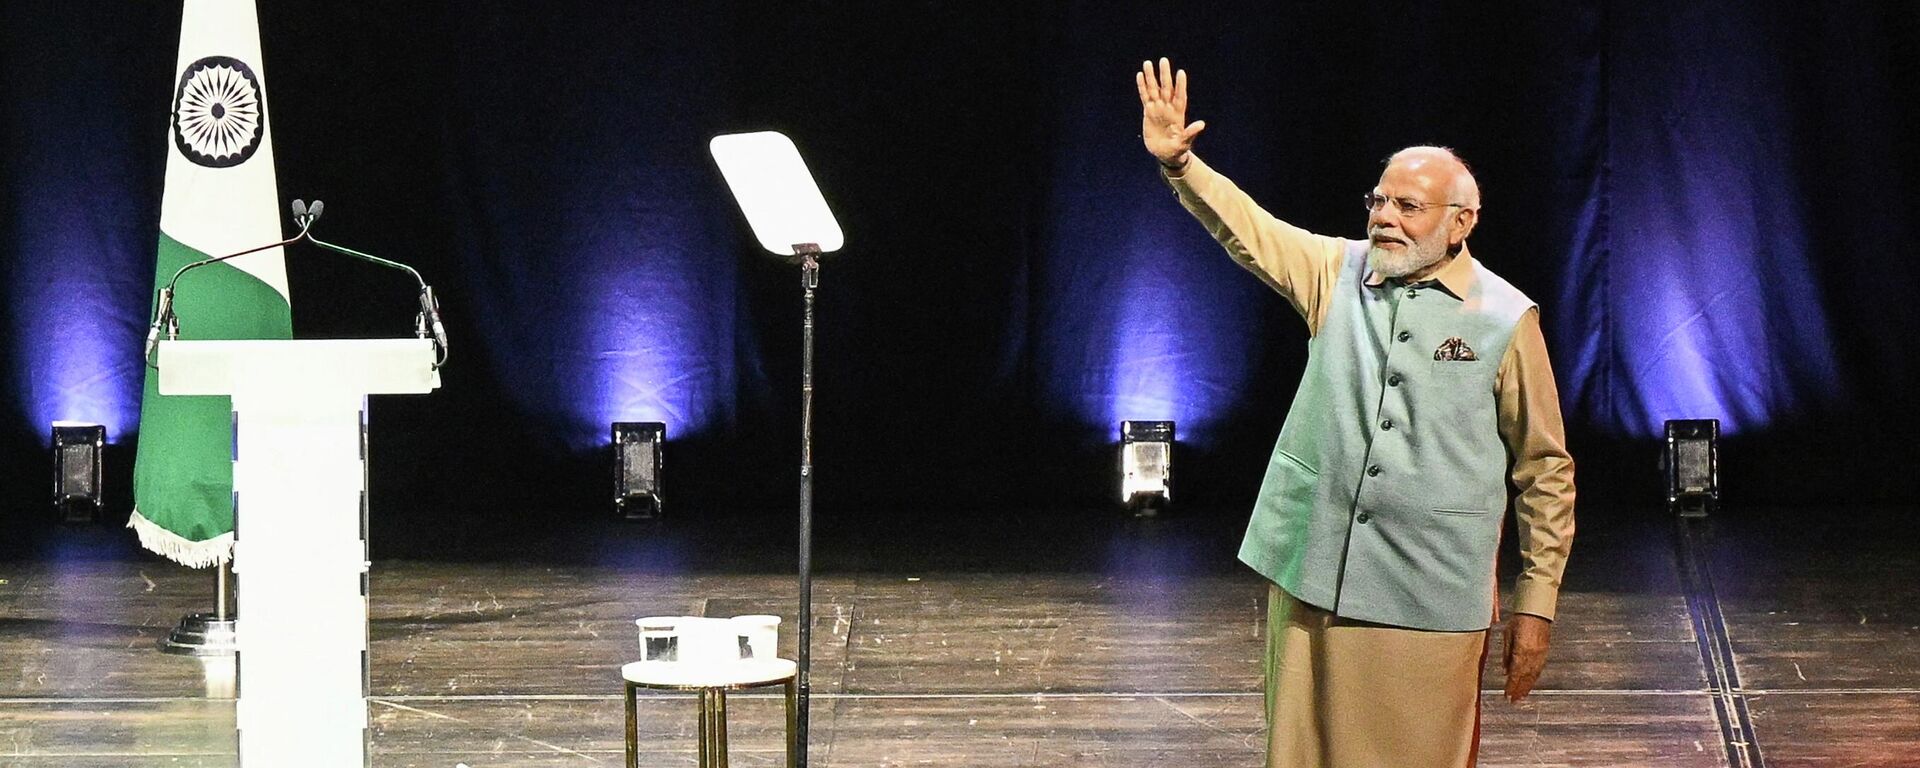 Indian Prime Minister Narendra Modi waves on stage as he delivers a speech at the Seine Musicale in Boulogne-Billancourt, Paris suburb on July 13, 2023. - Sputnik India, 1920, 14.07.2023